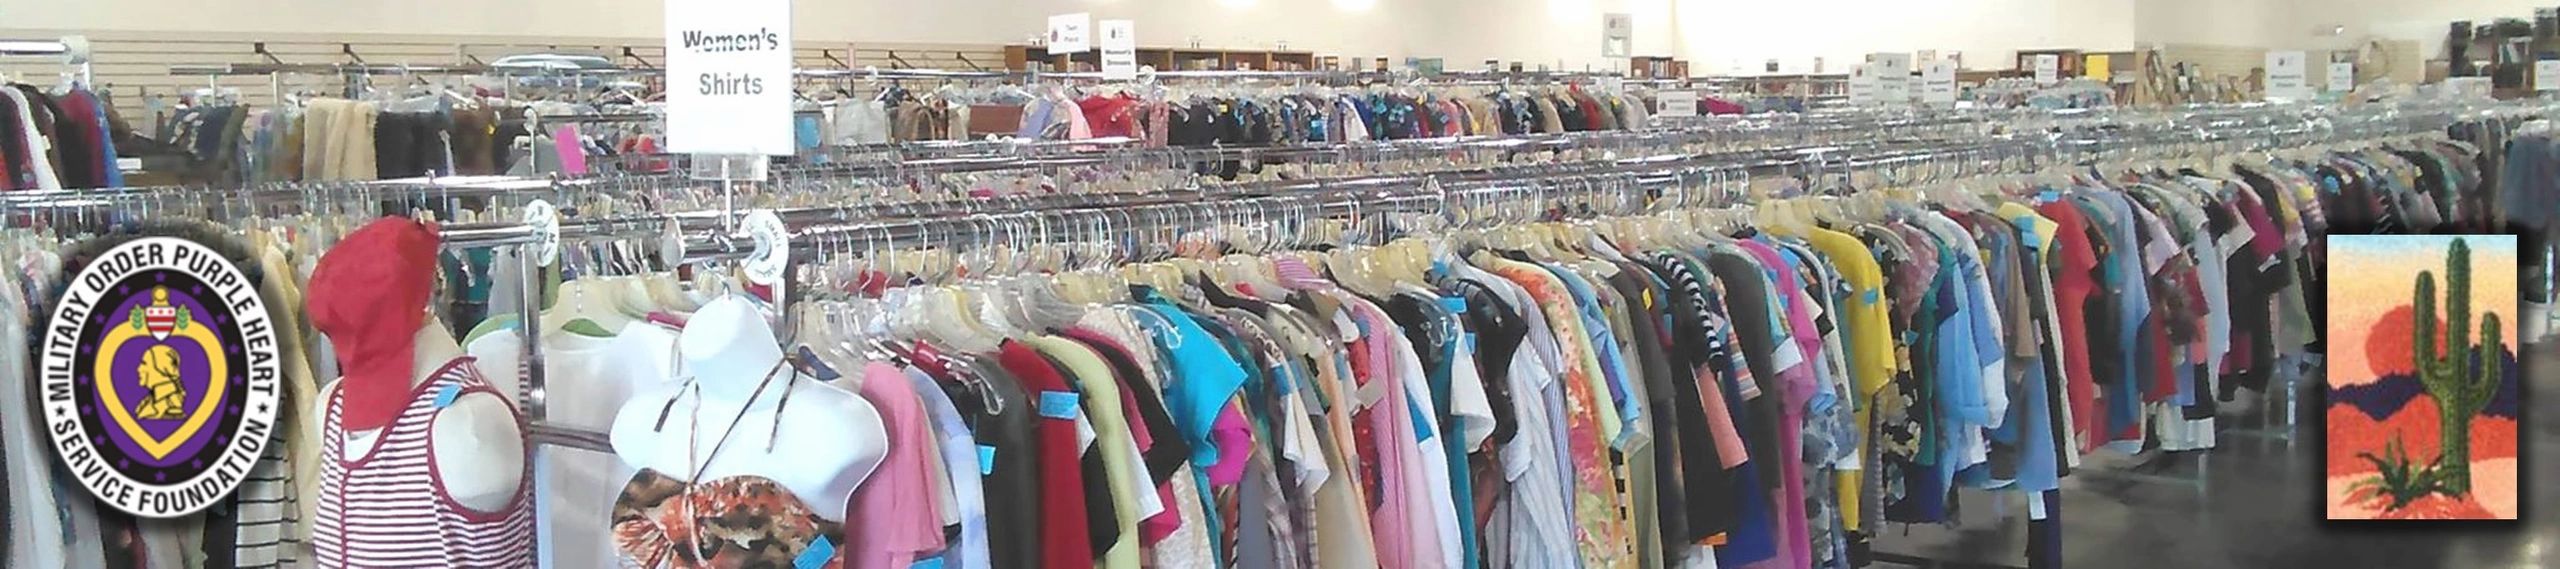 Thrift store with rows of clothing racks